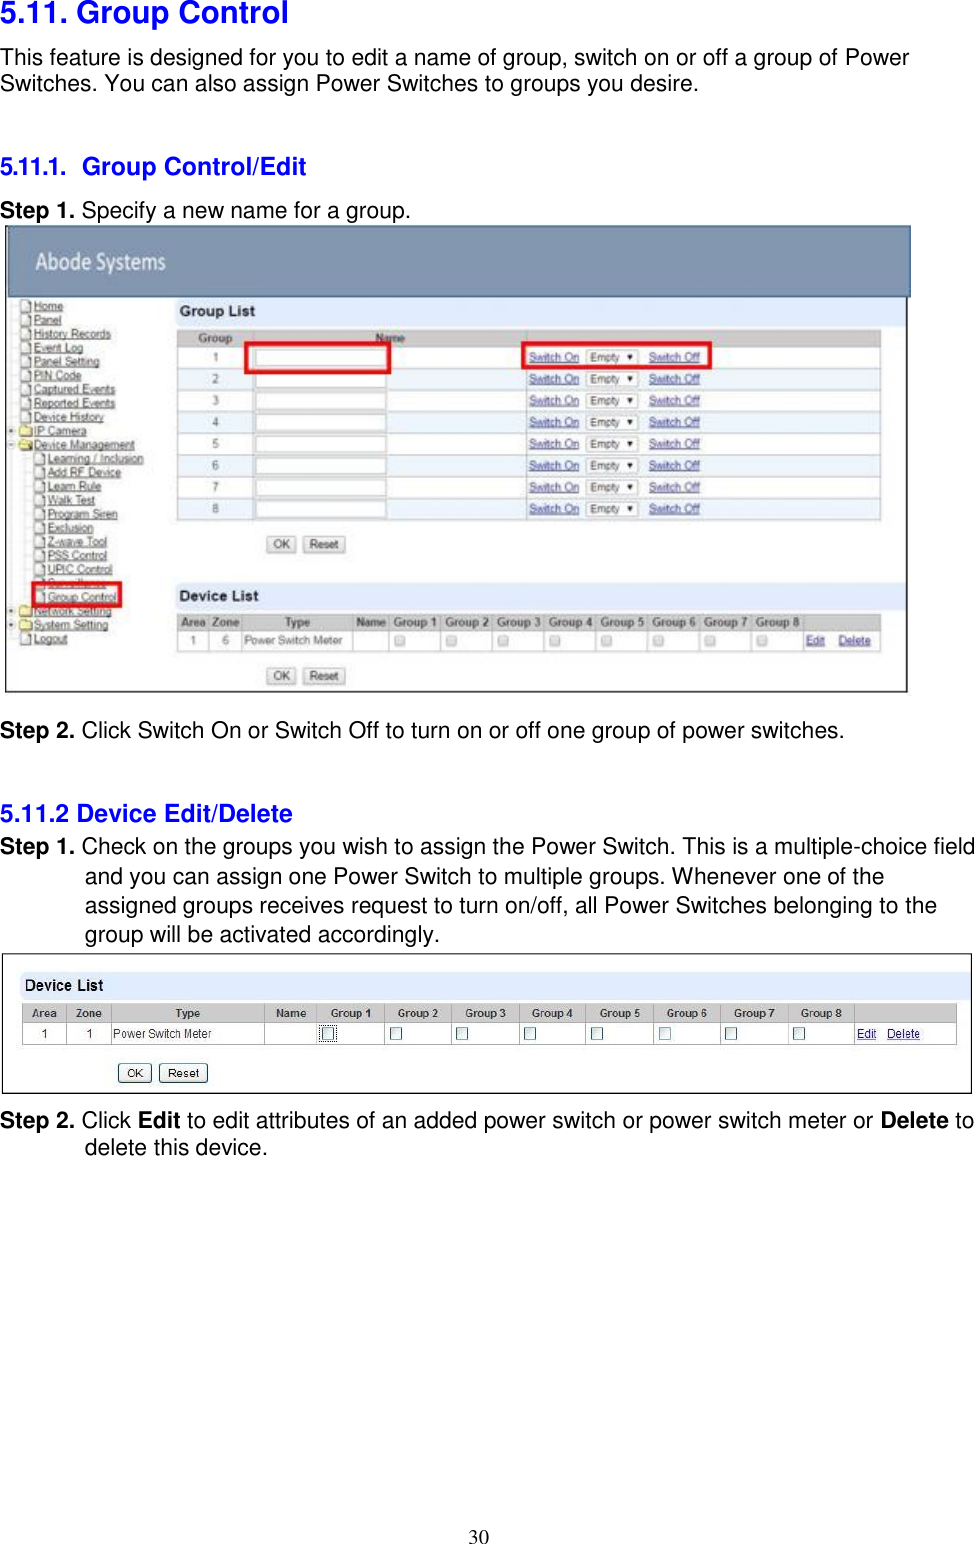 30  5.11. Group Control This feature is designed for you to edit a name of group, switch on or off a group of Power Switches. You can also assign Power Switches to groups you desire.   5.11.1. Group Control/Edit Step 1. Specify a new name for a group.           Step 2. Click Switch On or Switch Off to turn on or off one group of power switches.   5.11.2 Device Edit/Delete Step 1. Check on the groups you wish to assign the Power Switch. This is a multiple-choice field and you can assign one Power Switch to multiple groups. Whenever one of the assigned groups receives request to turn on/off, all Power Switches belonging to the group will be activated accordingly. Step 2. Click Edit to edit attributes of an added power switch or power switch meter or Delete to delete this device. 